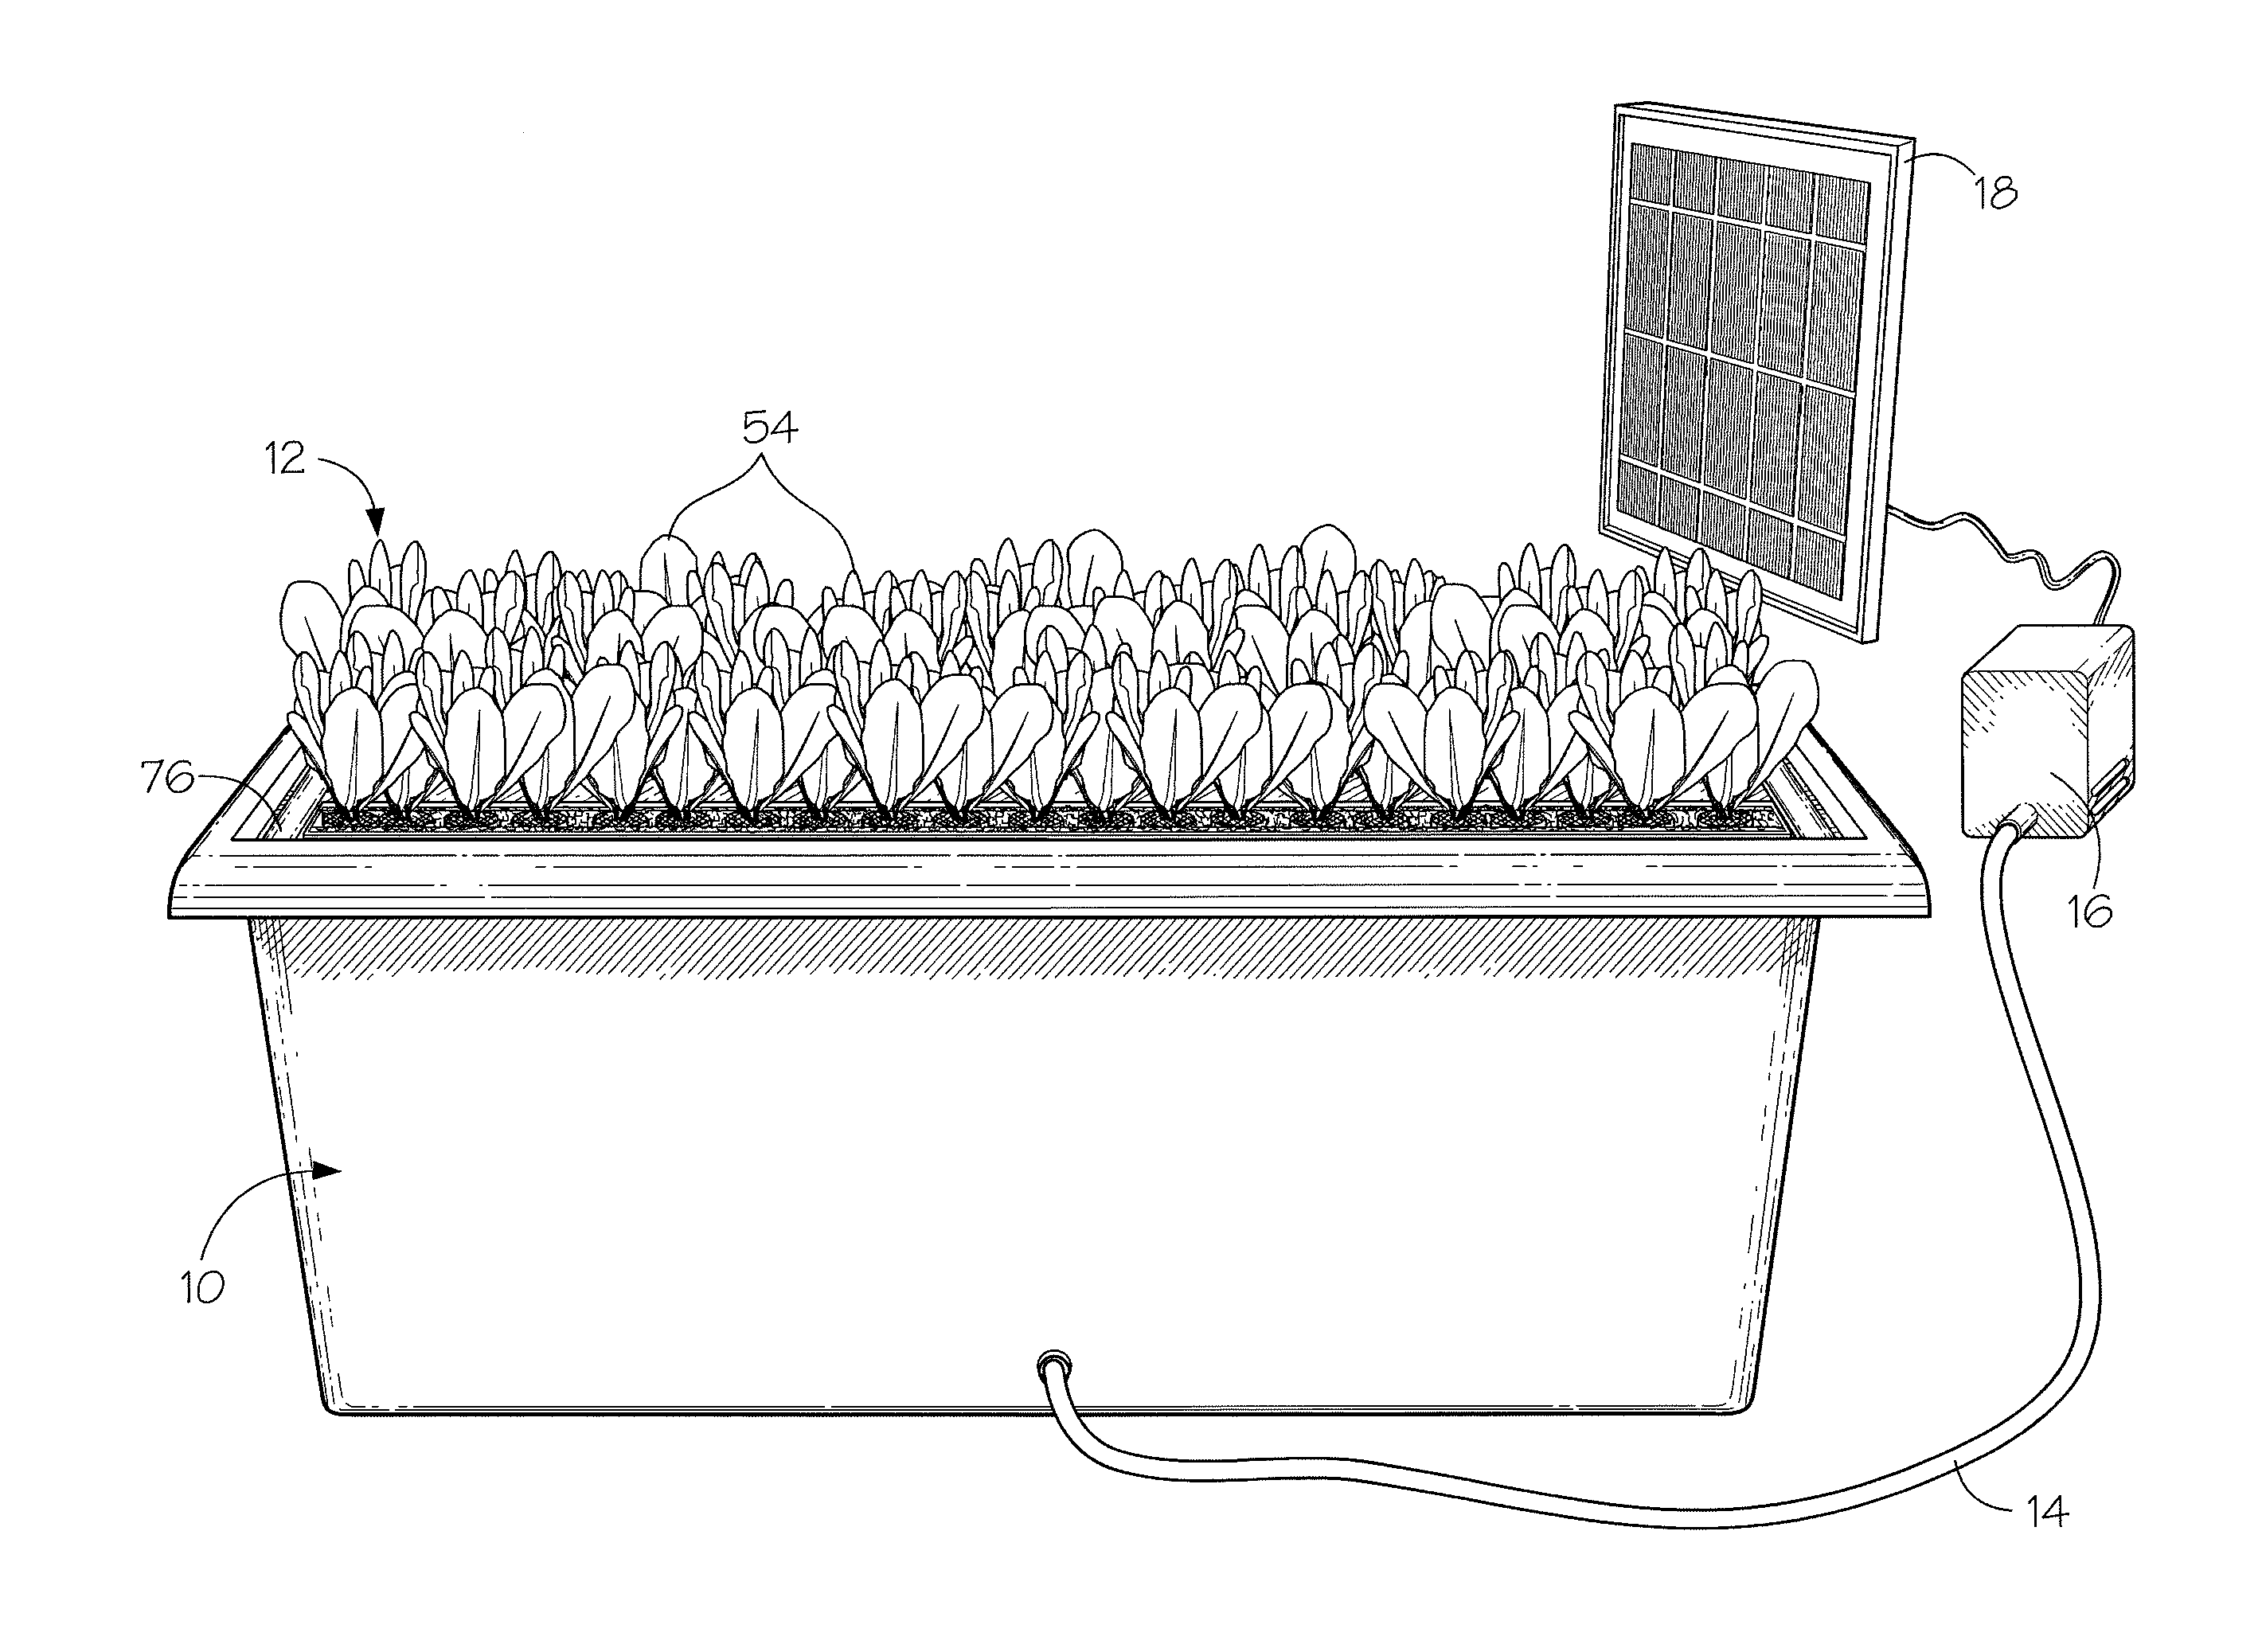 Hydroponic growing system